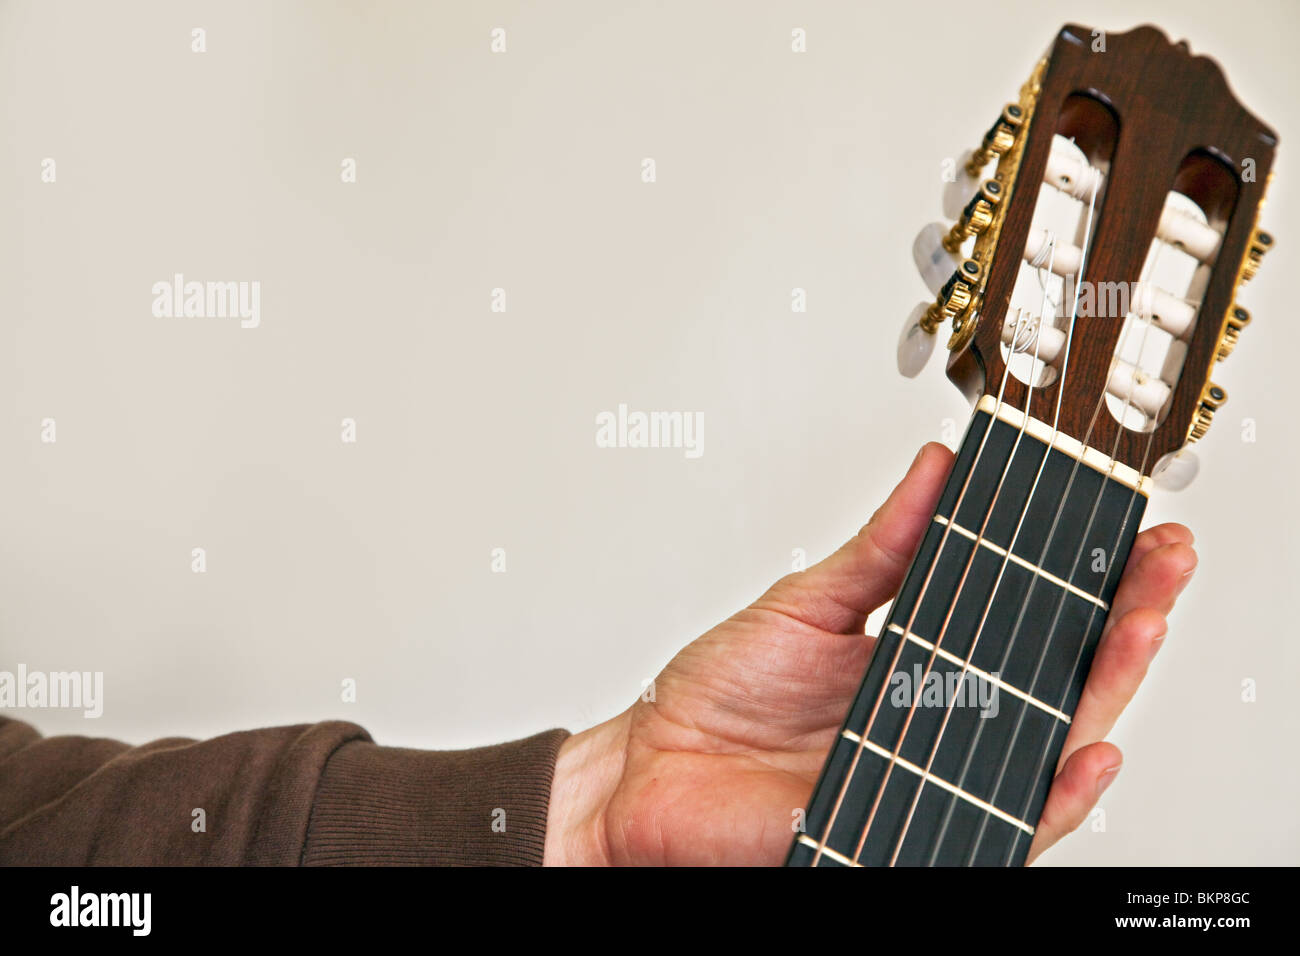 Nylon string classical guitar close up with left hand holding the fretboard neck Stock Photo